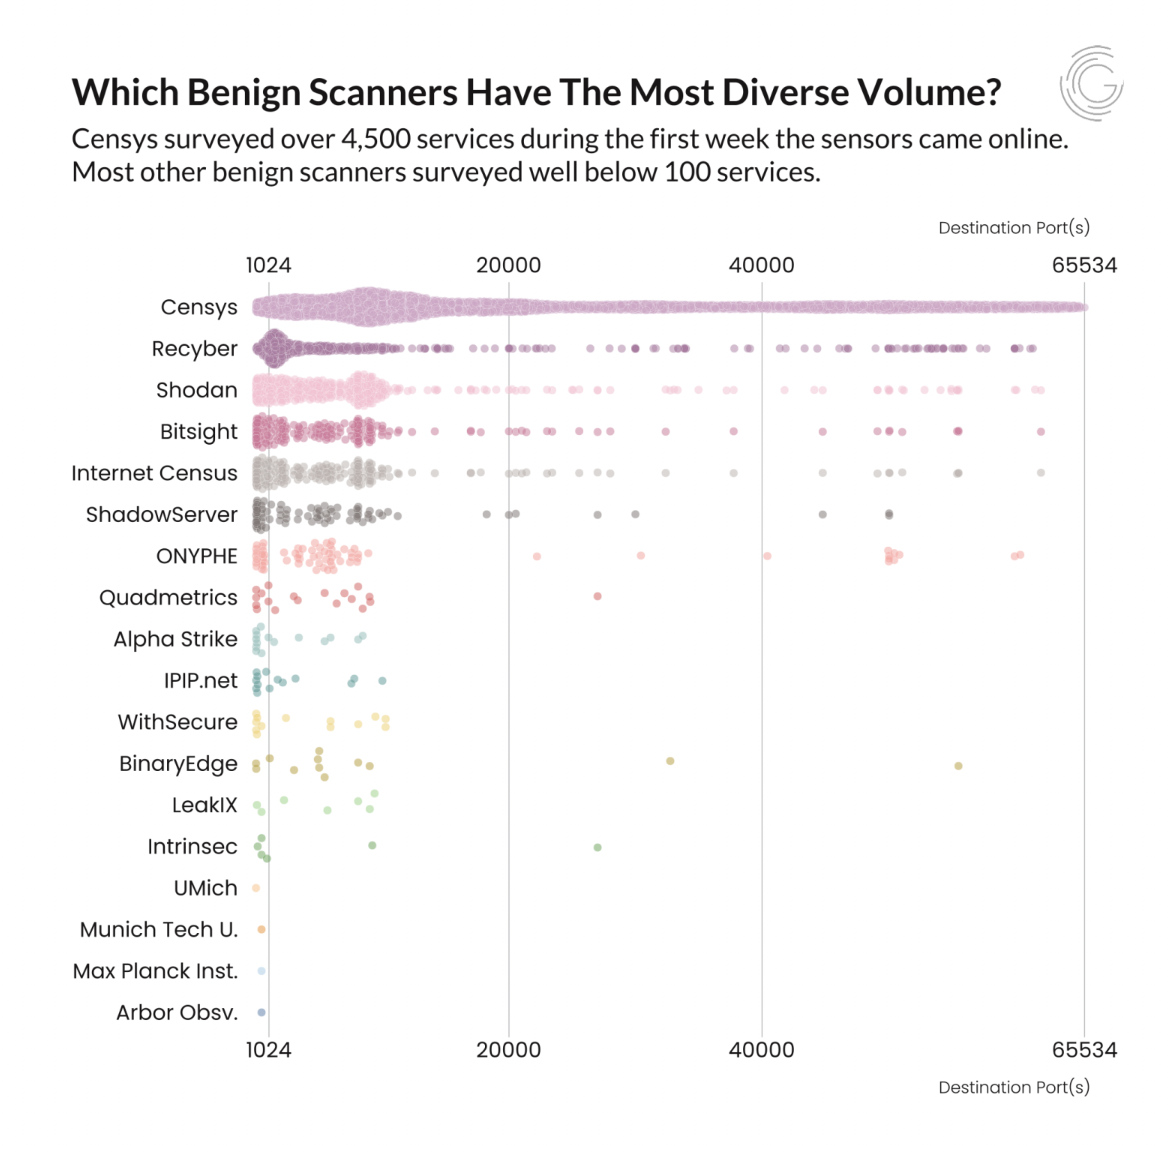 GreyNoise Graphic: Which Benign Scanners Have the Most Diverse Volume?